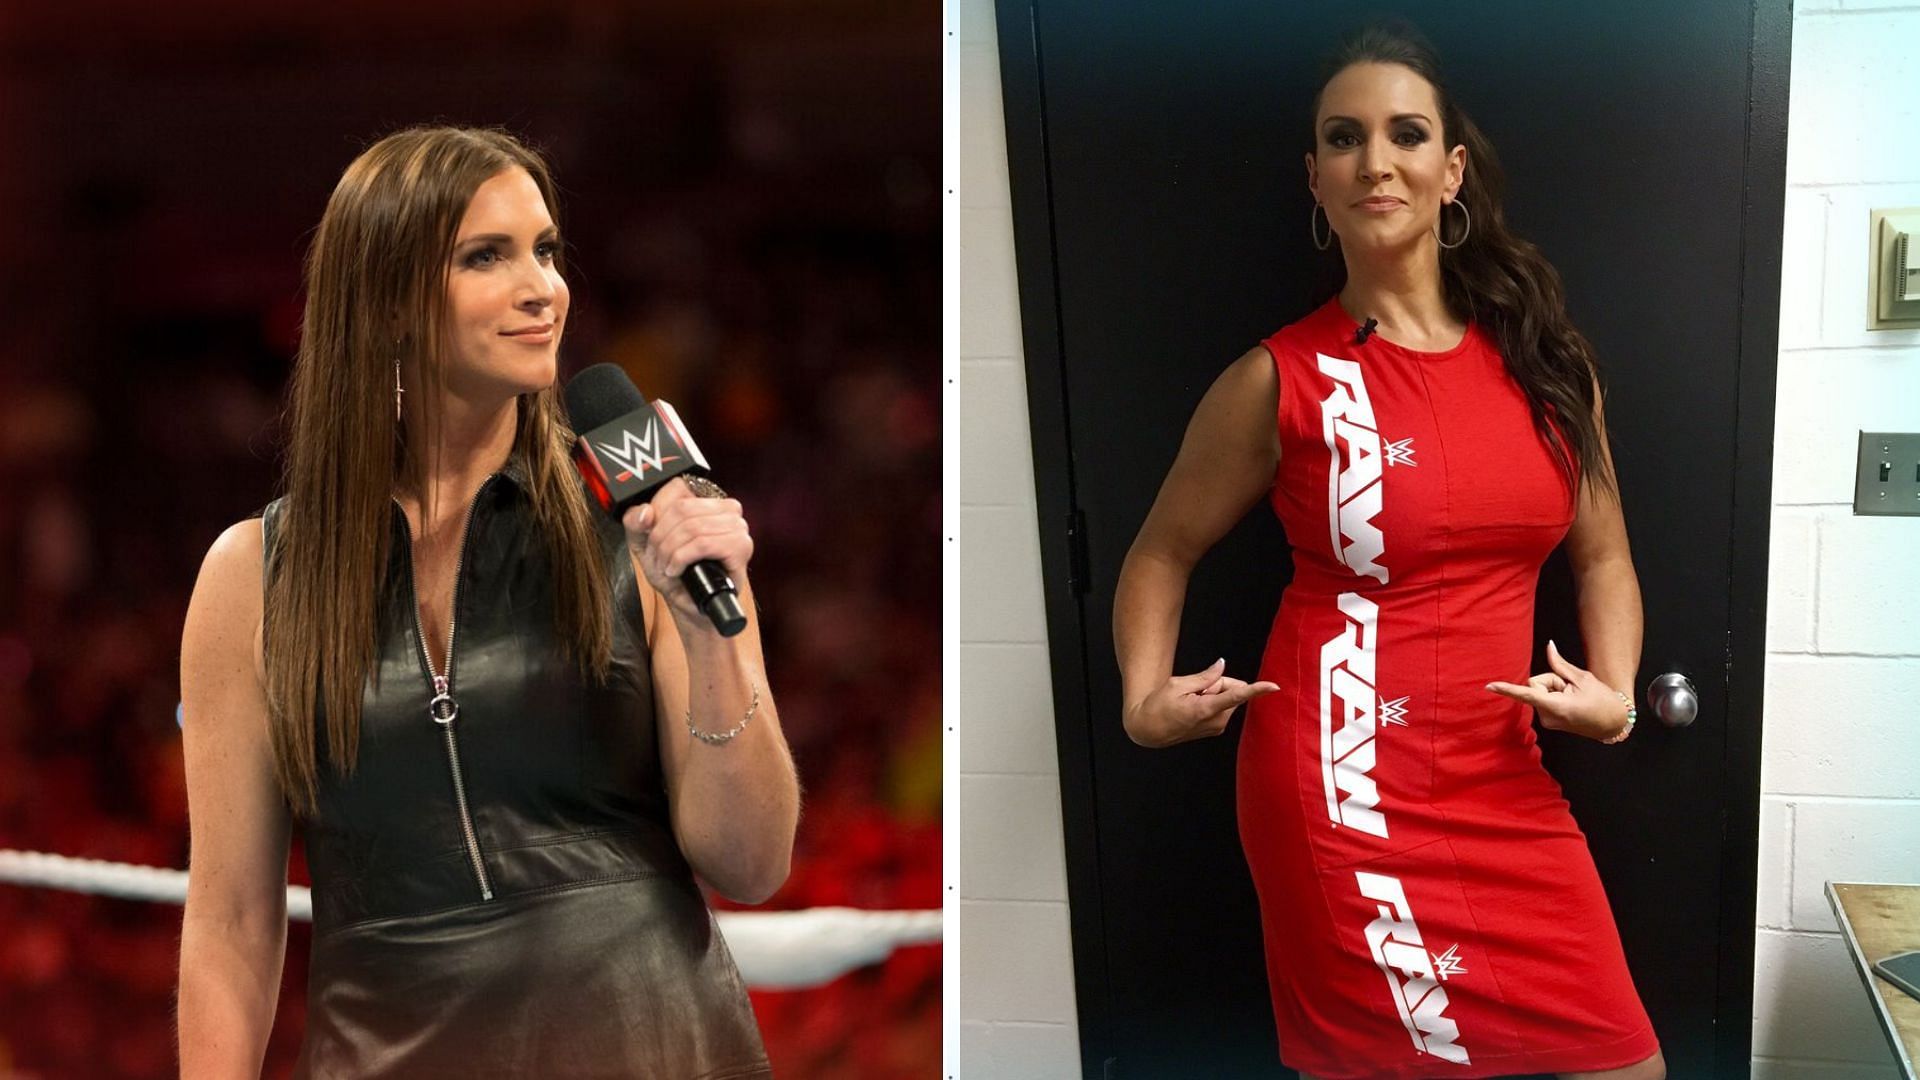 Stephanie McMahon recently became the WWE co-CEO